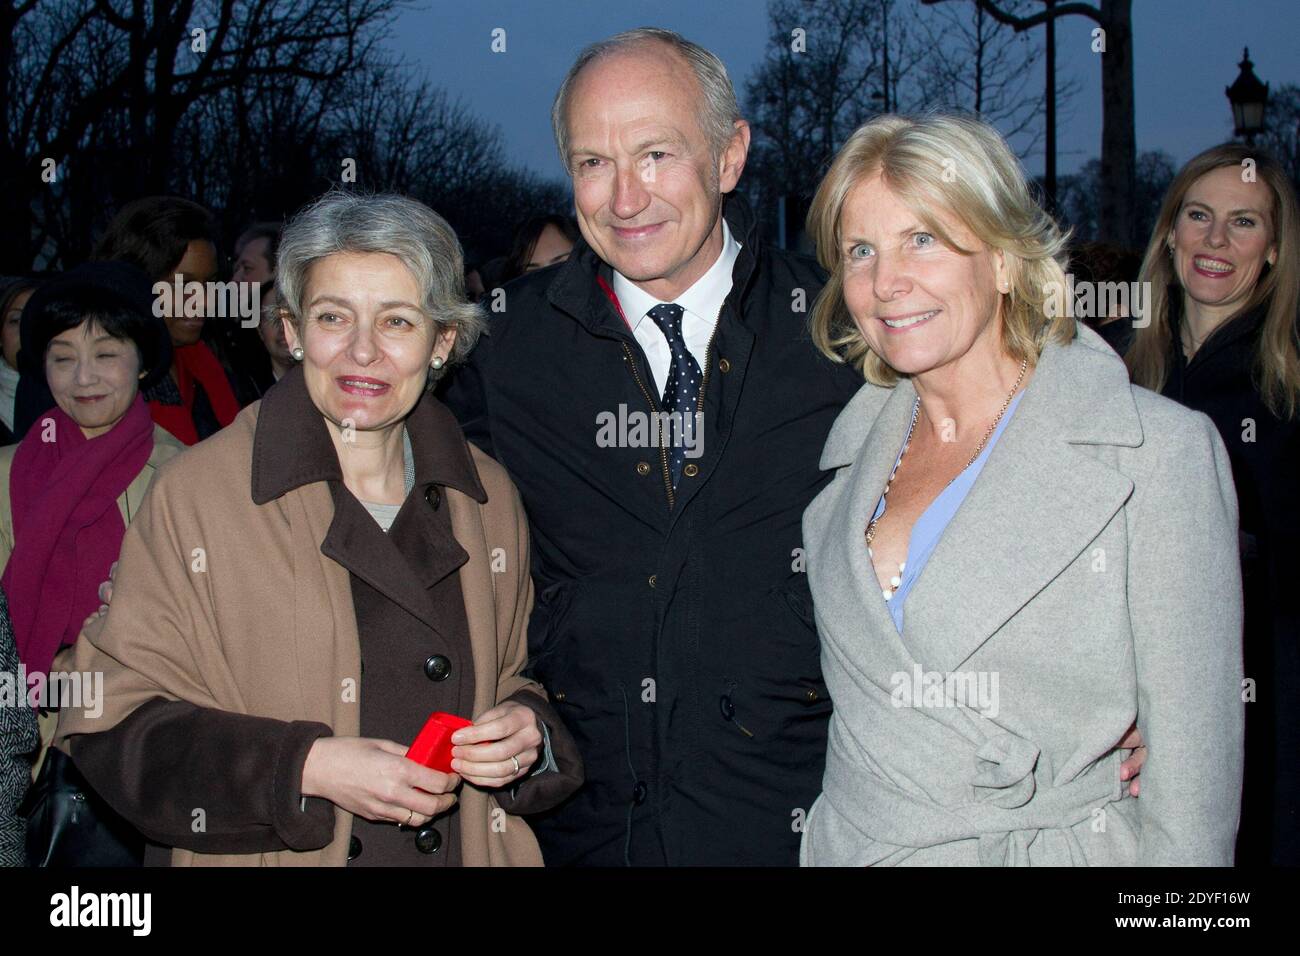 Irina Bokova, General Director of UNESCO, Jean-Paul Agon, President and General Director of L'Oréal and Président of the L'Oréal Foundation and Mrs Alain Flammarion (Suzanna) attending the unveilling of the 'L'Oreal-Unesco Awards for women in Science' photo exhibition at Avenue des Champs-Elysees on March 27, 2013 in Paris, France. Photo by Aurore Marechal/ABACAPRESS.COM Stock Photo